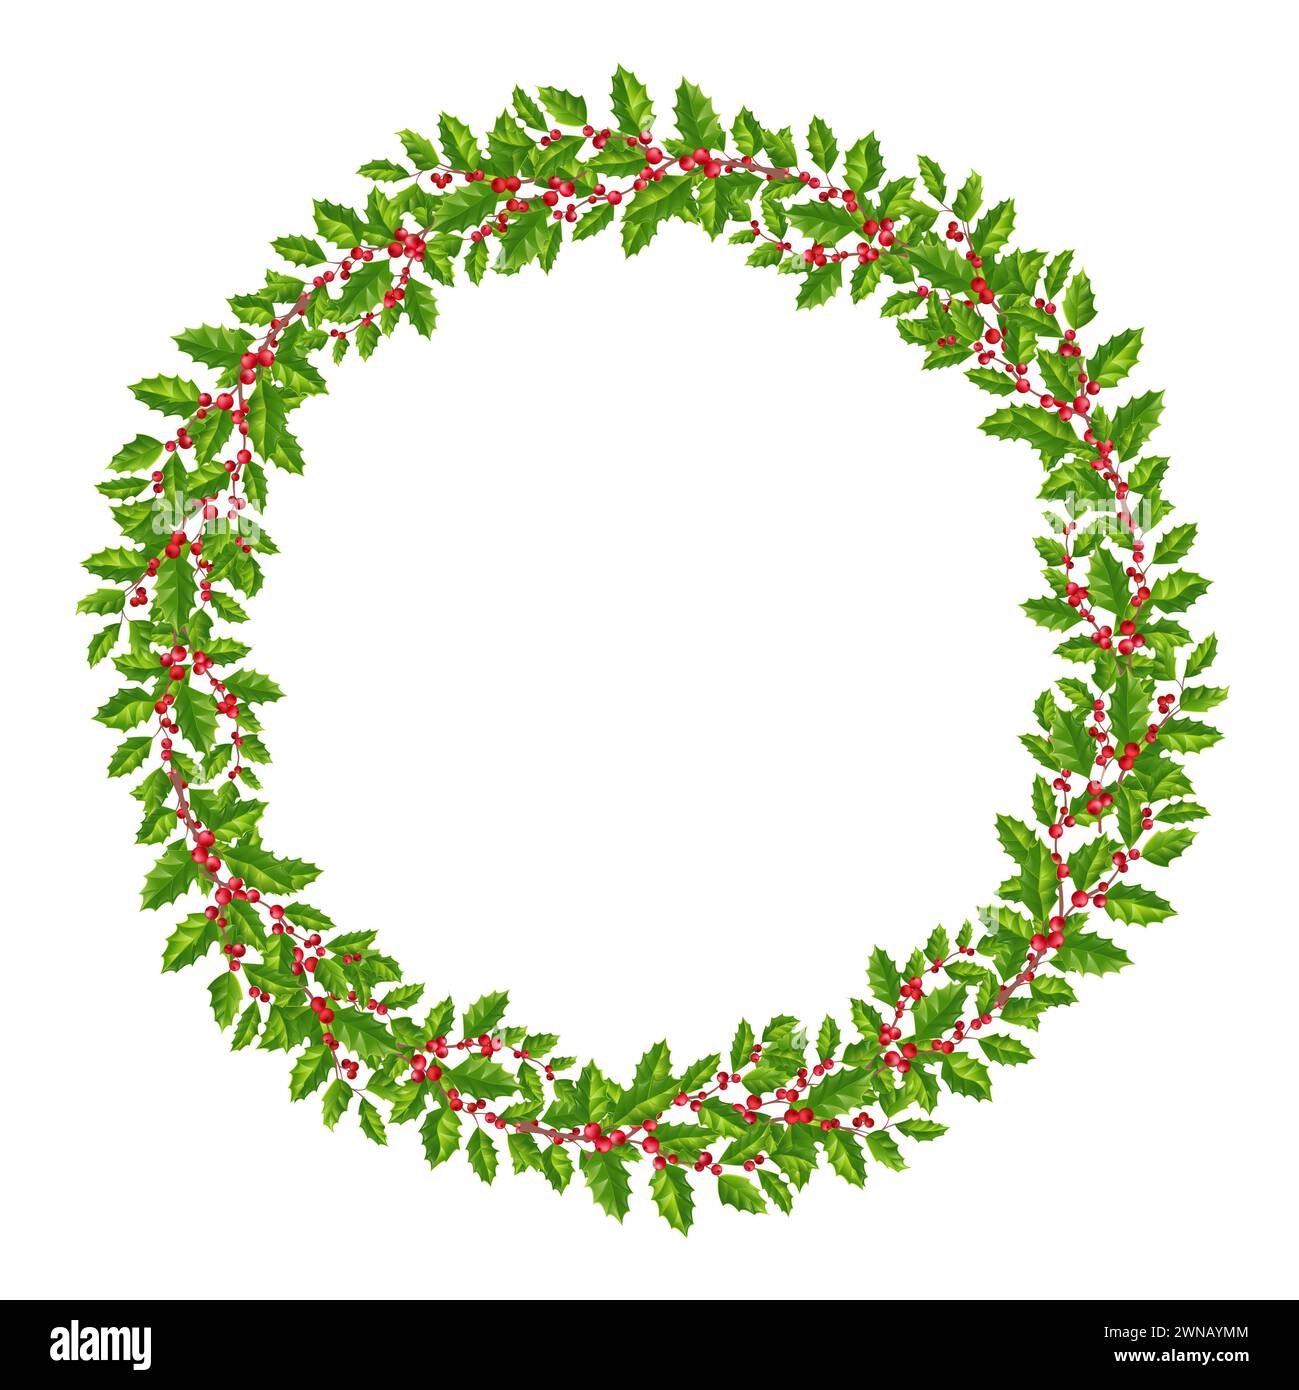 Christmas wreath with holly , green leaves and red berries, and place for text. greeting cards and invitations isolated Stock Photo